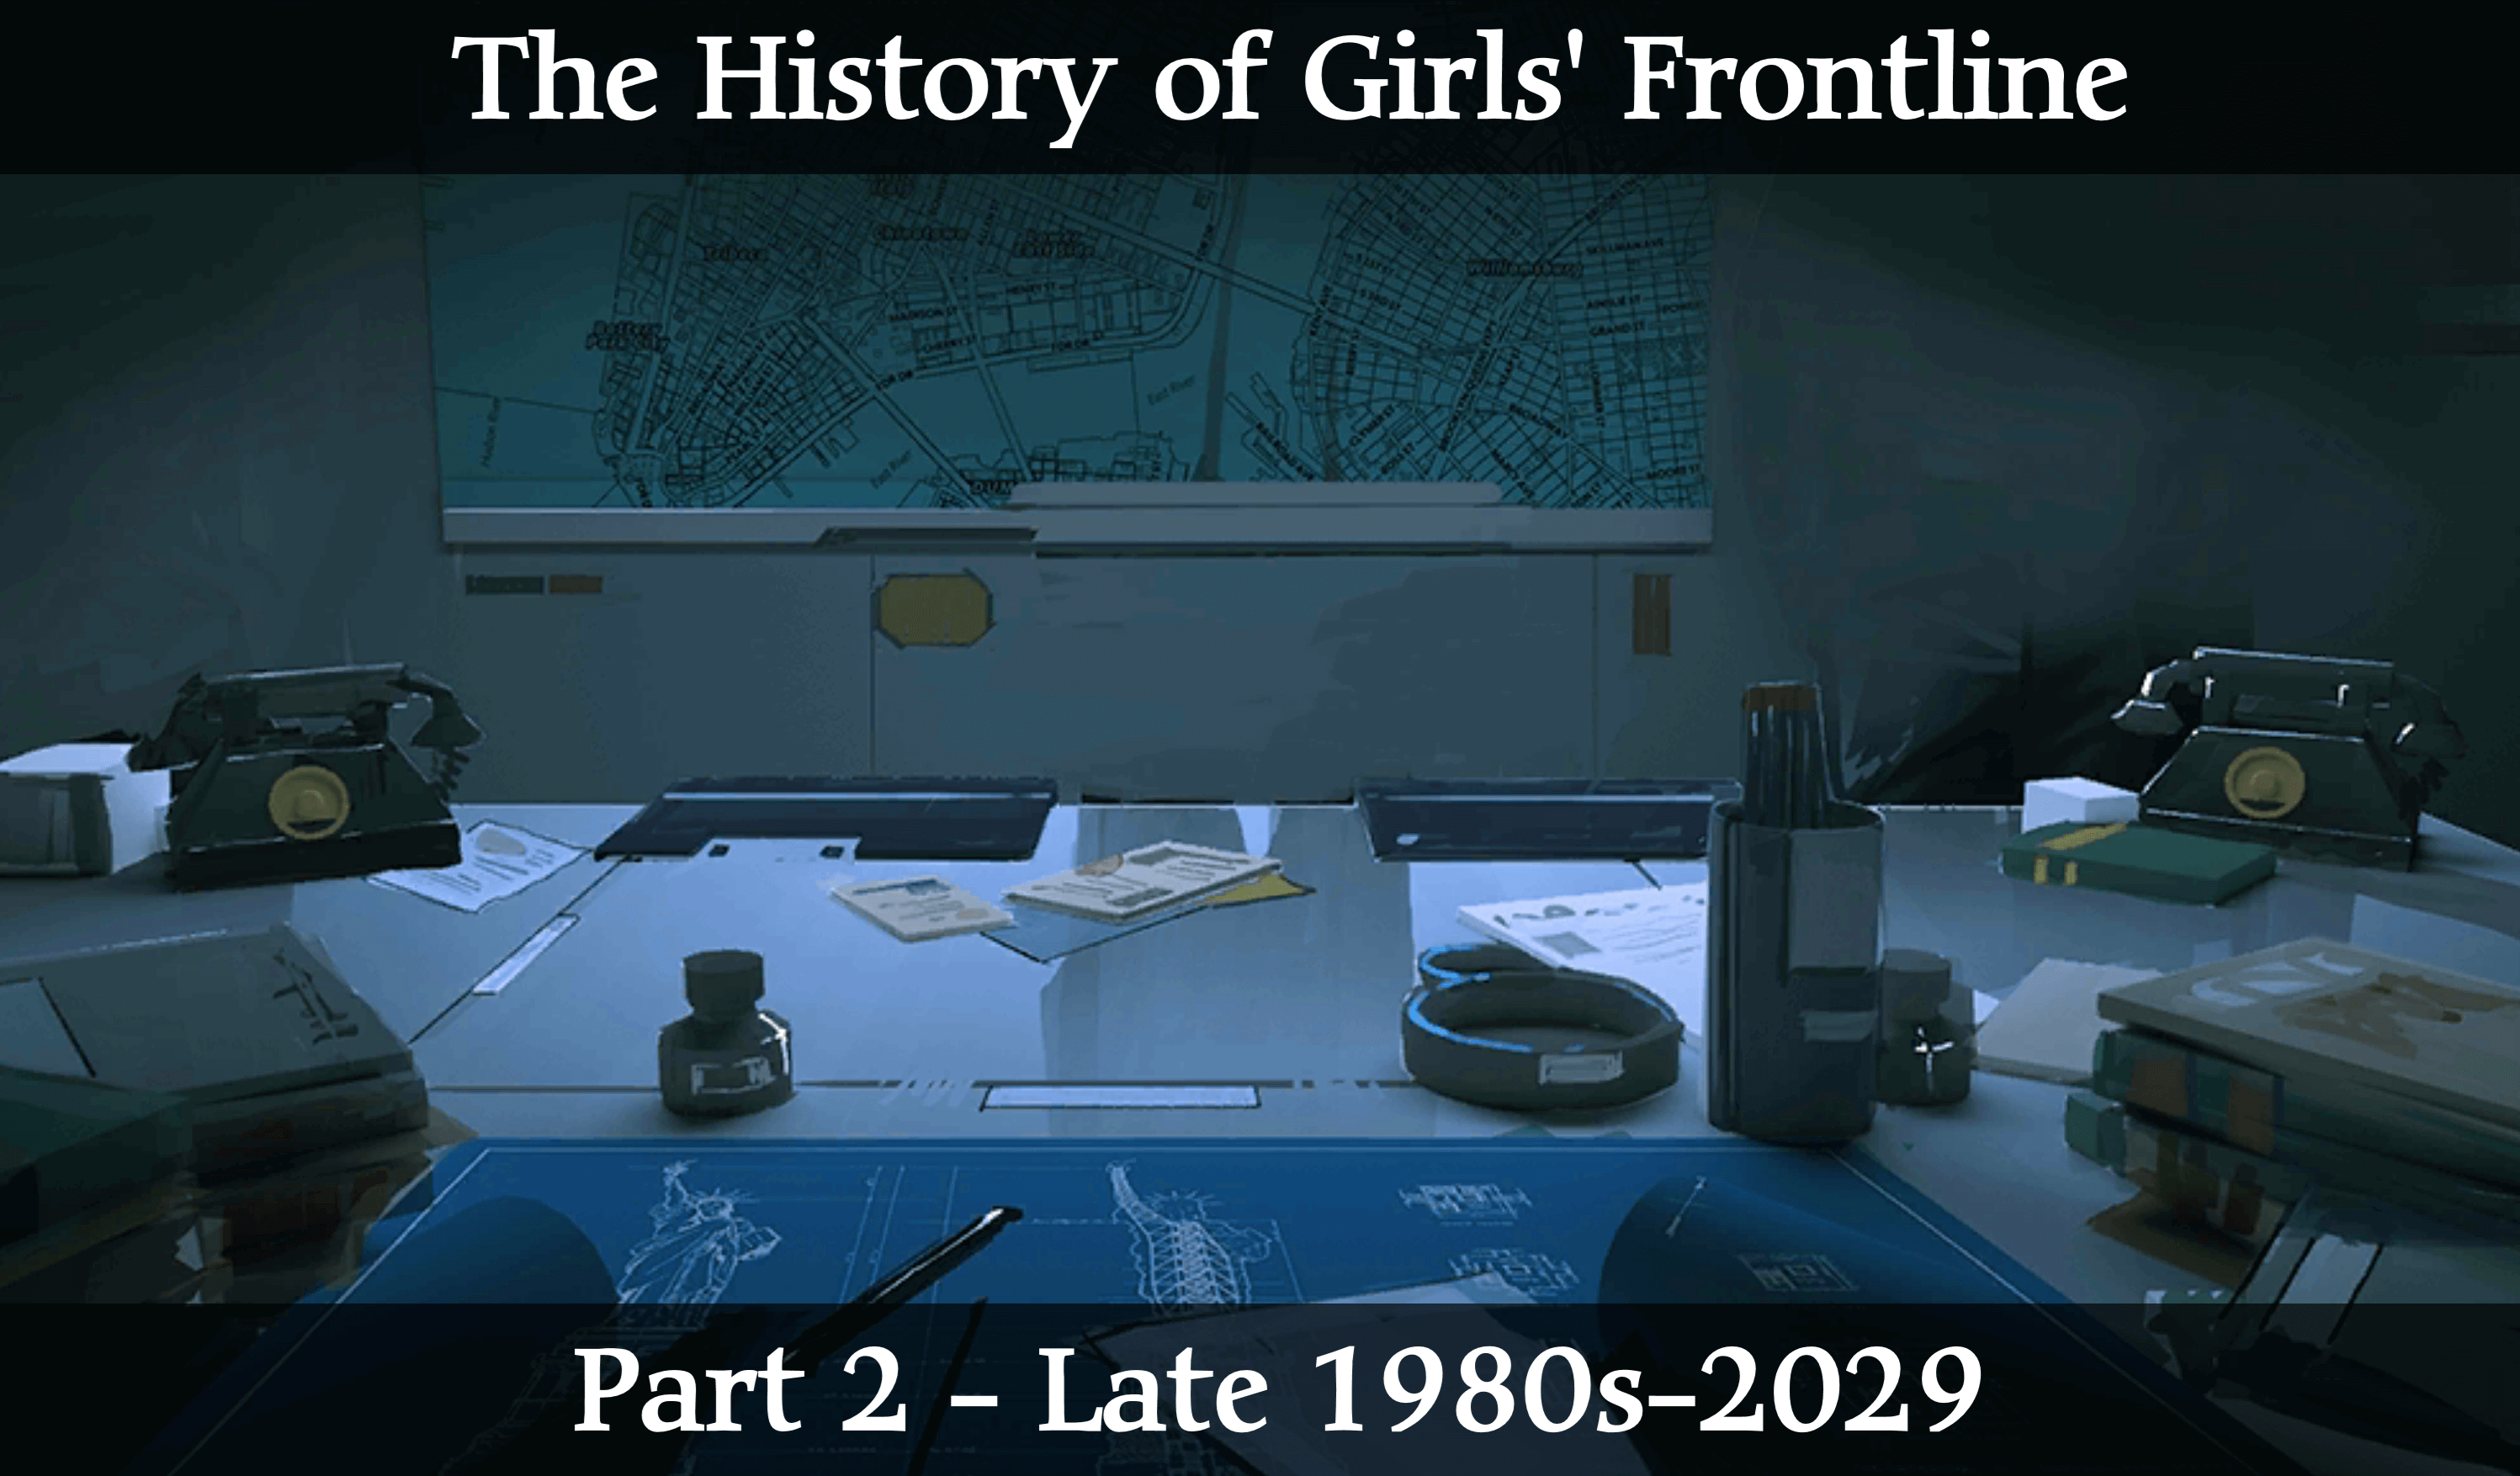 Part two of the full history of Girls' Frontline and Reverse Collapse. Part two covers the events between the late 1980s to 2029.